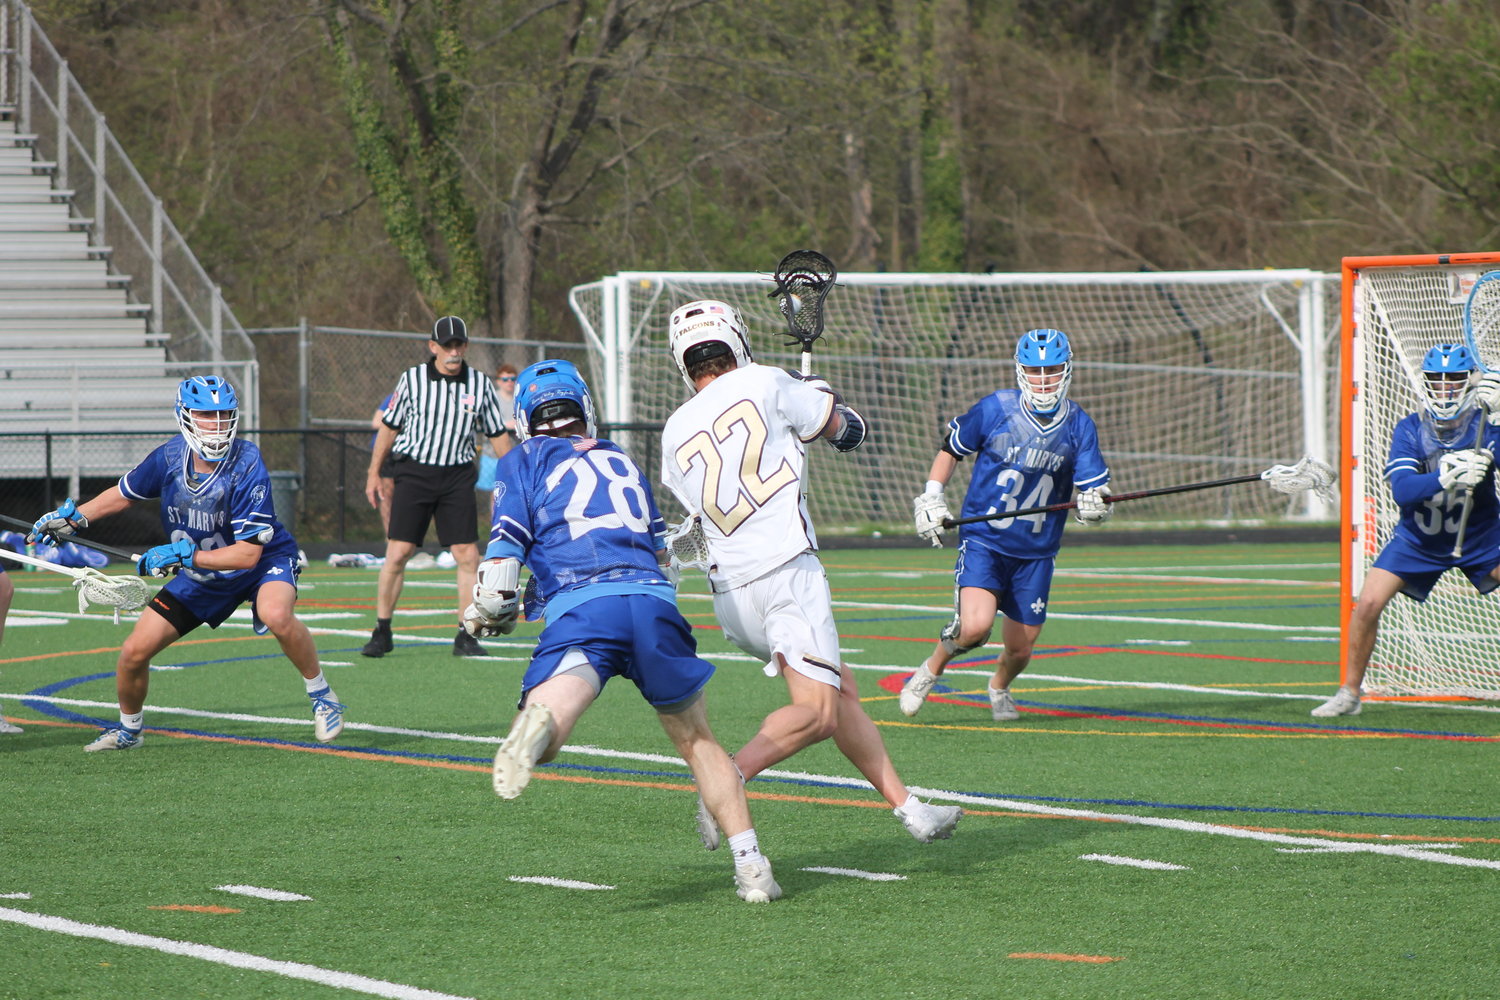 Severna Park's Kevin Bredeck prepared to take a shot on goal. He scored on the shot.